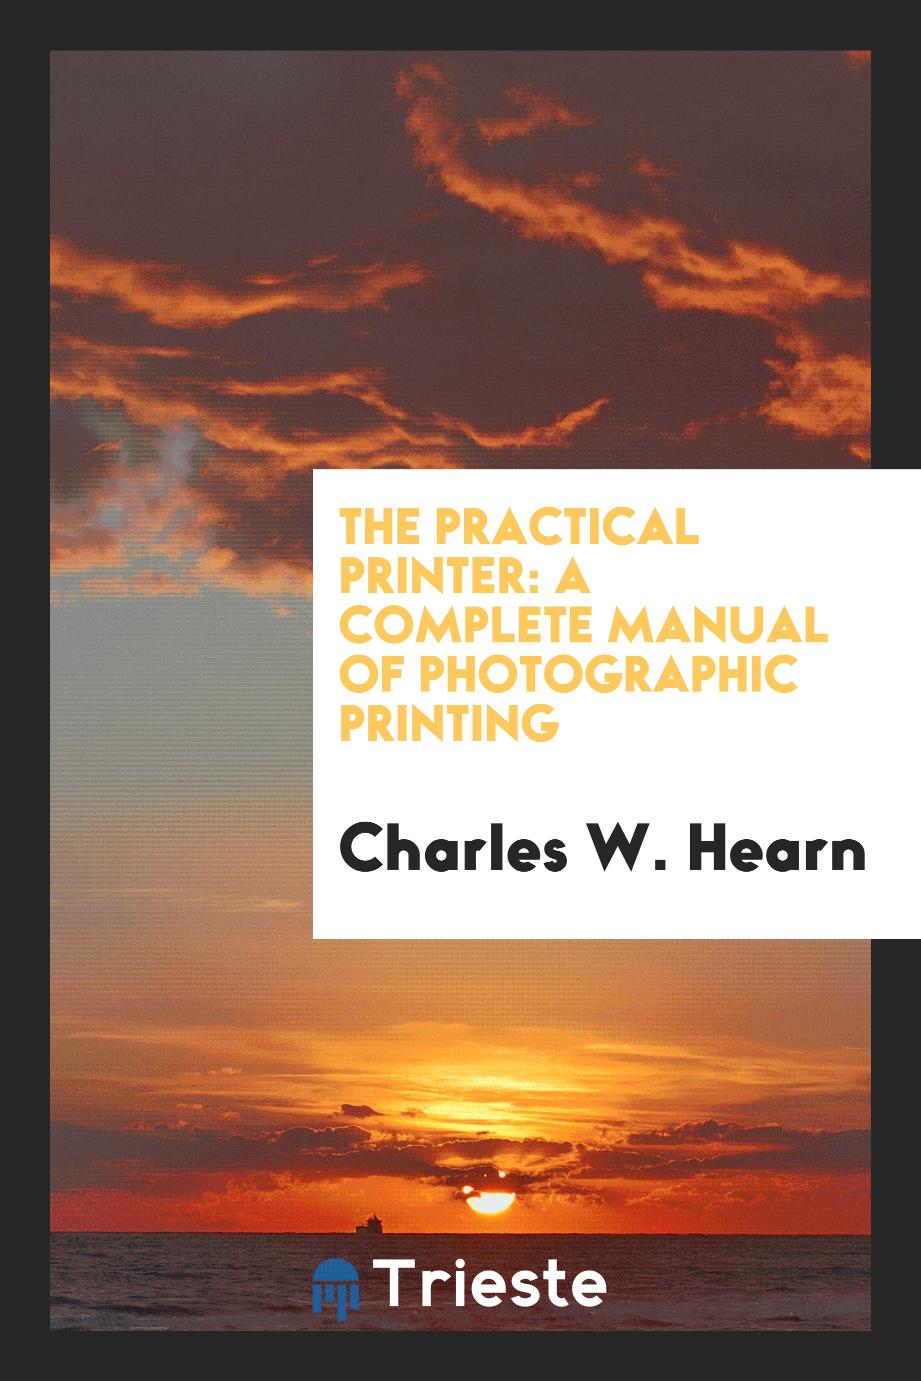 The practical printer: a complete manual of photographic printing